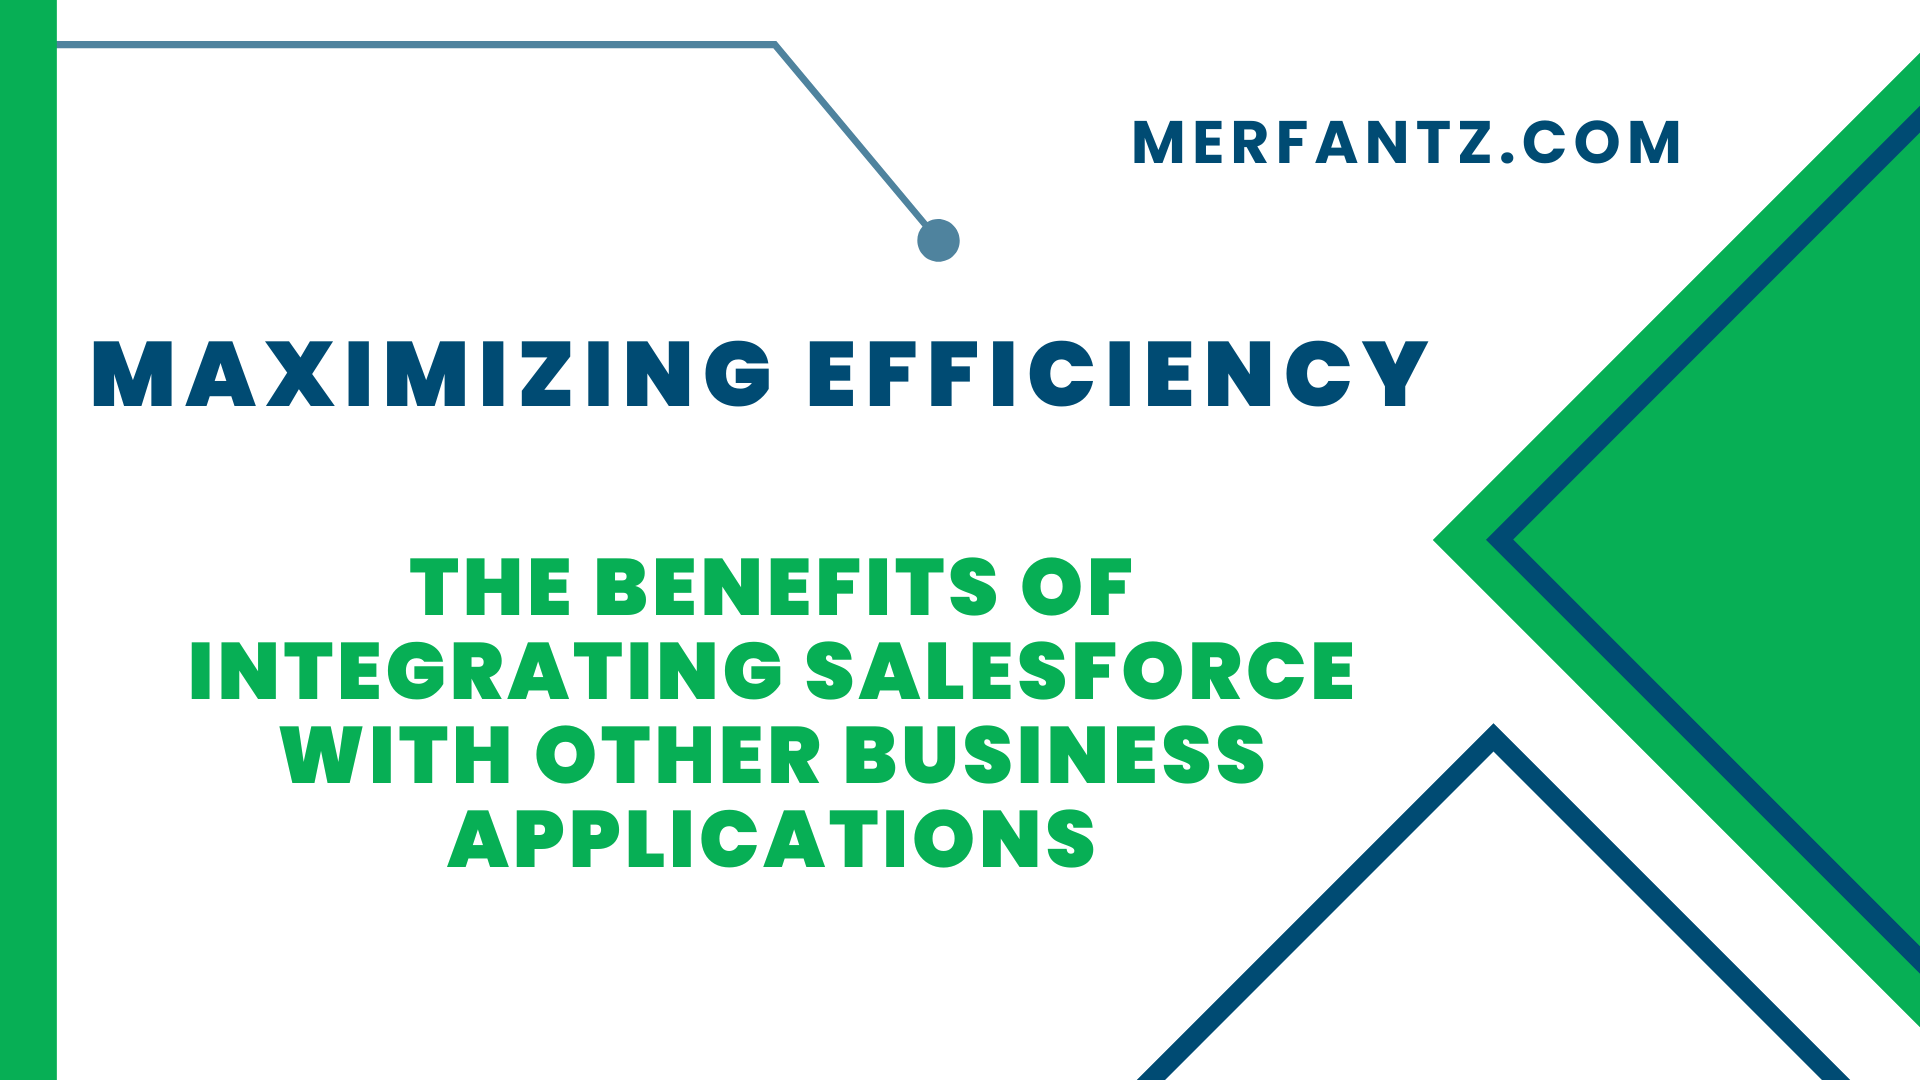 The Benefits of Integrating Salesforce with Other Business Applications